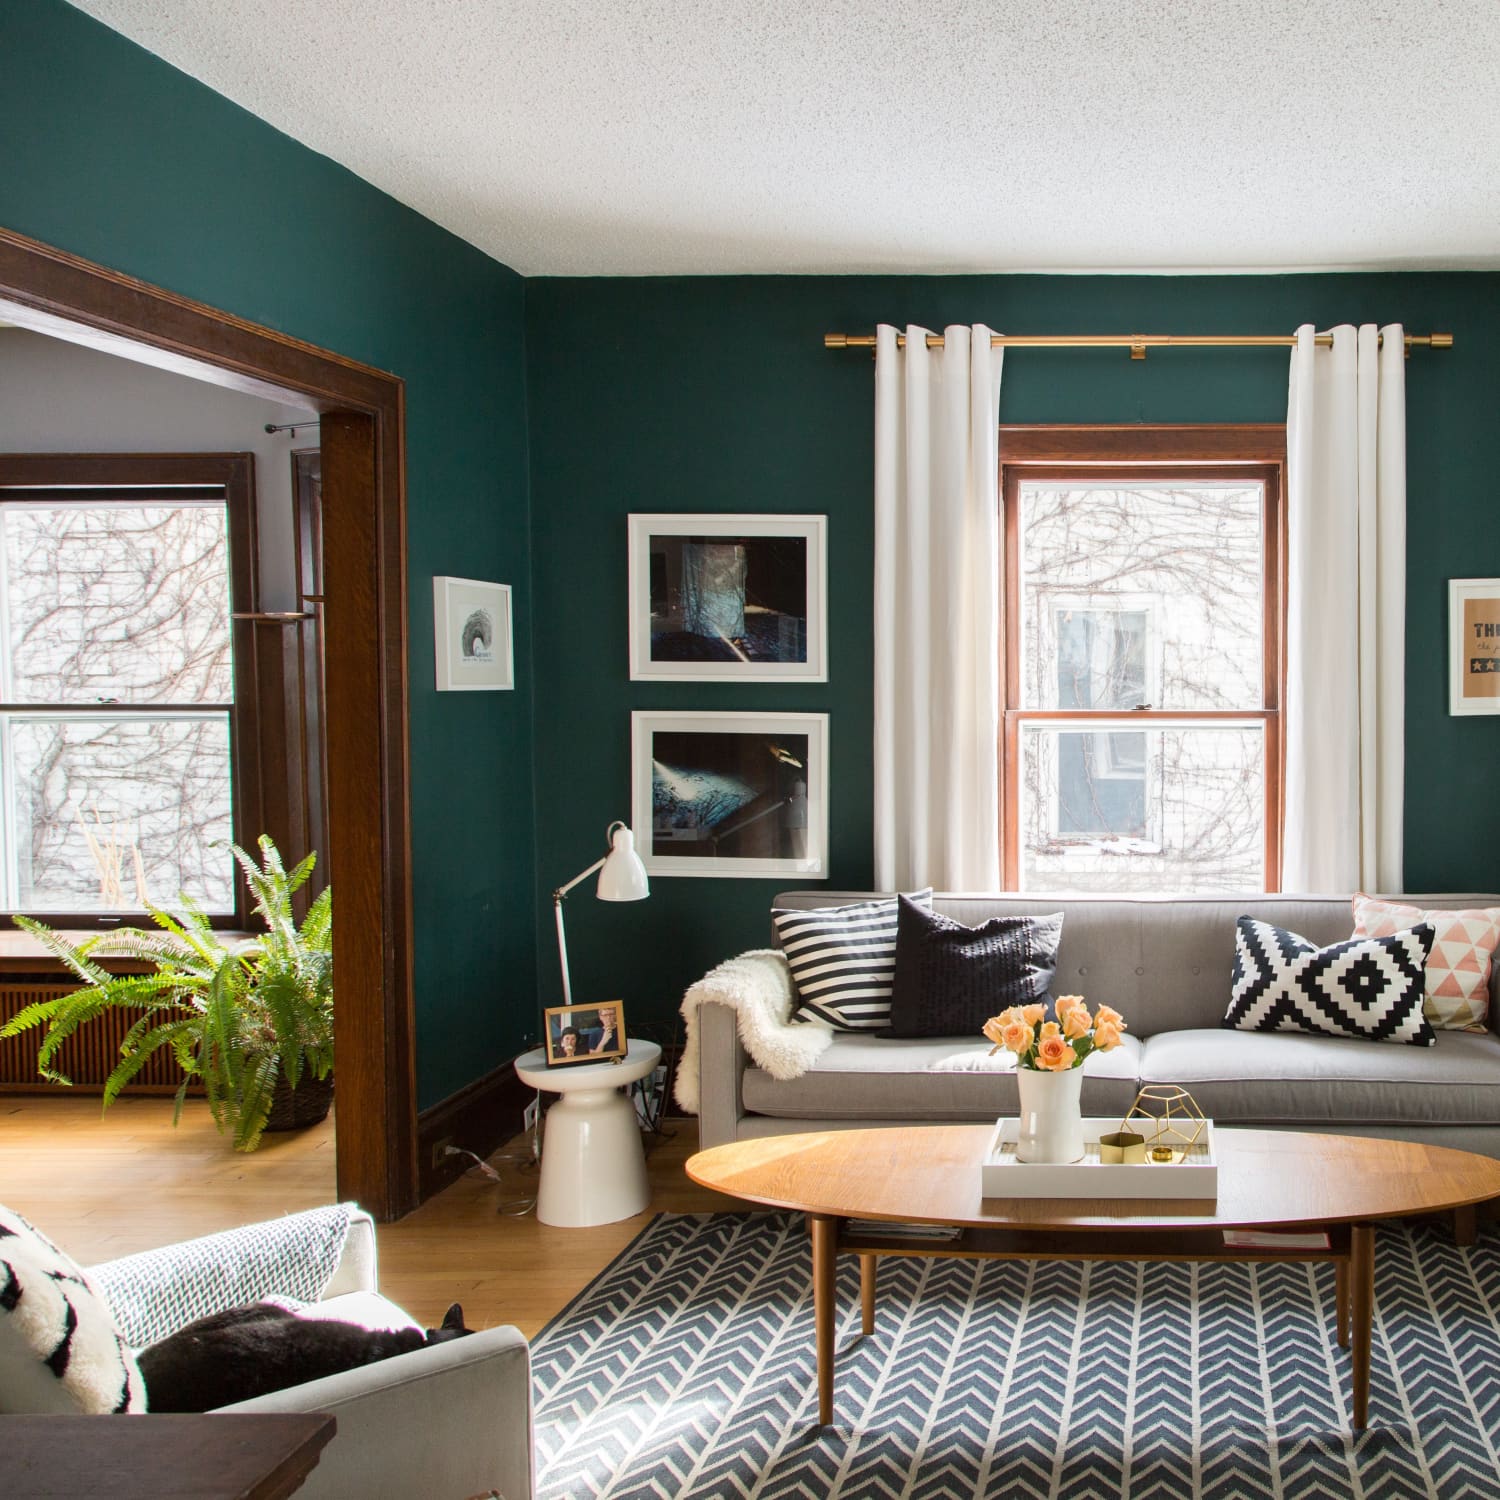 The 20 Best Green Living Room Ideas We've Ever Seen   Stylish ...